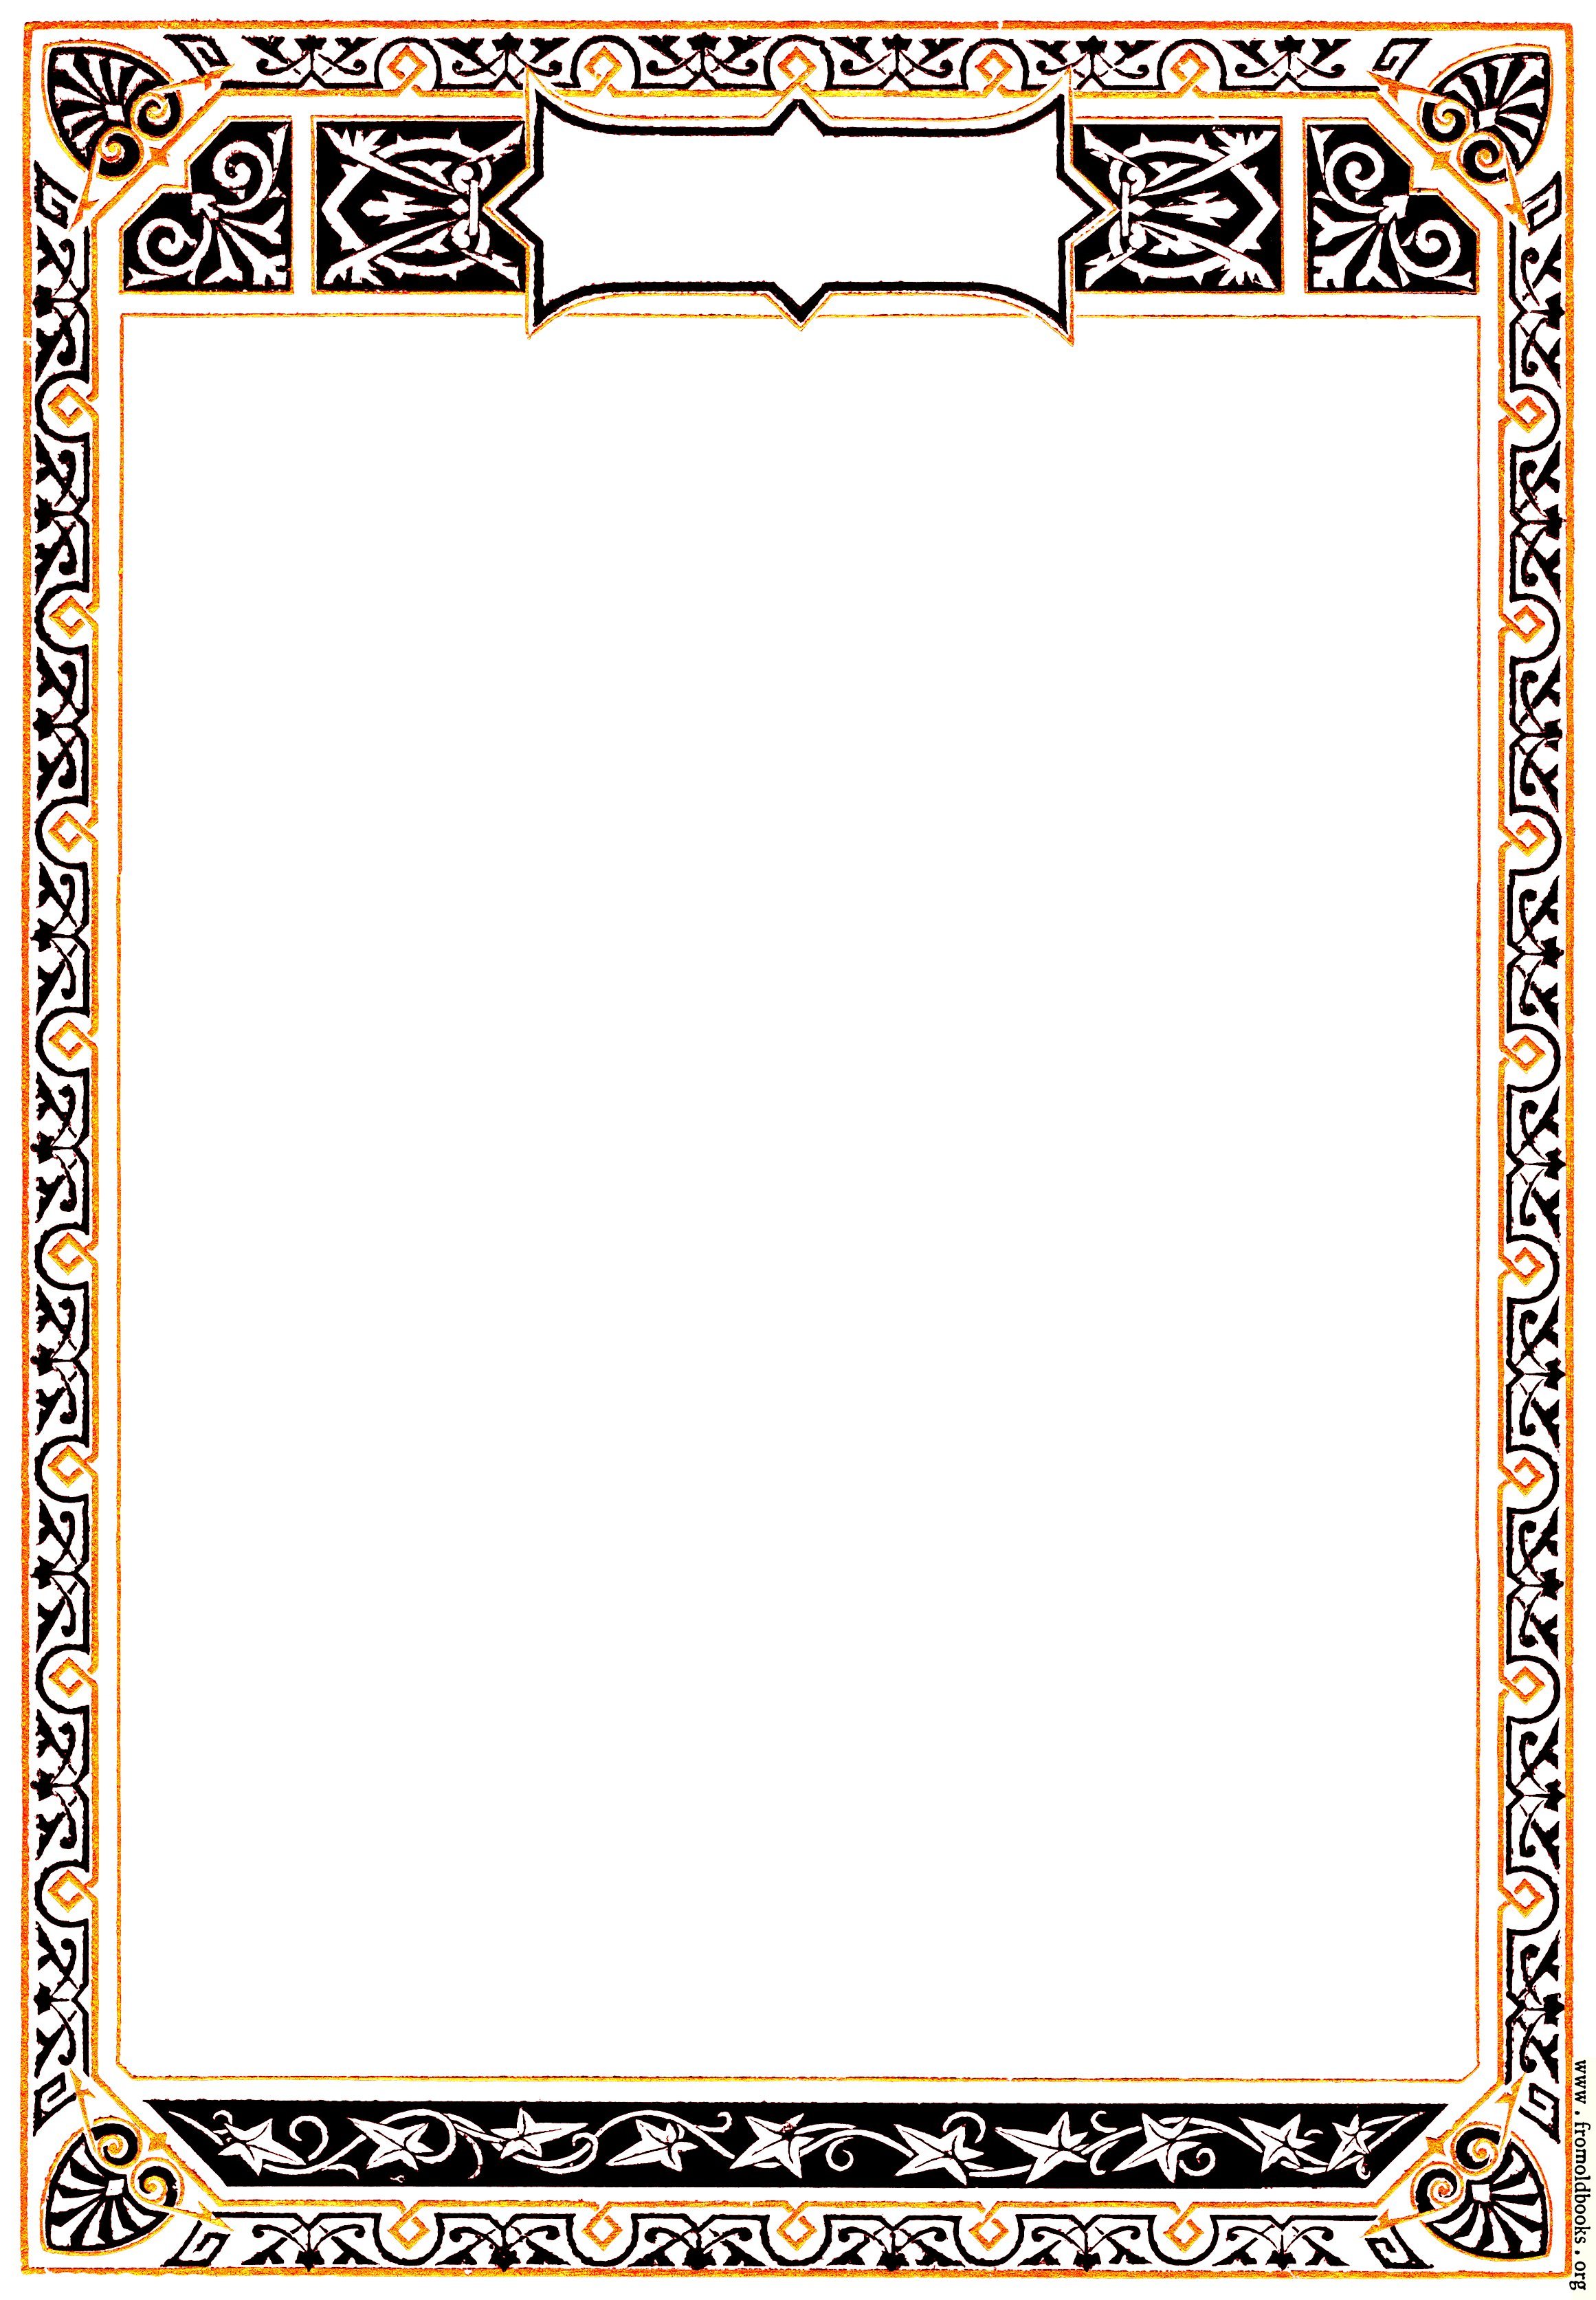 FOBO - Ornate Early Victorian full-page Geometric Border